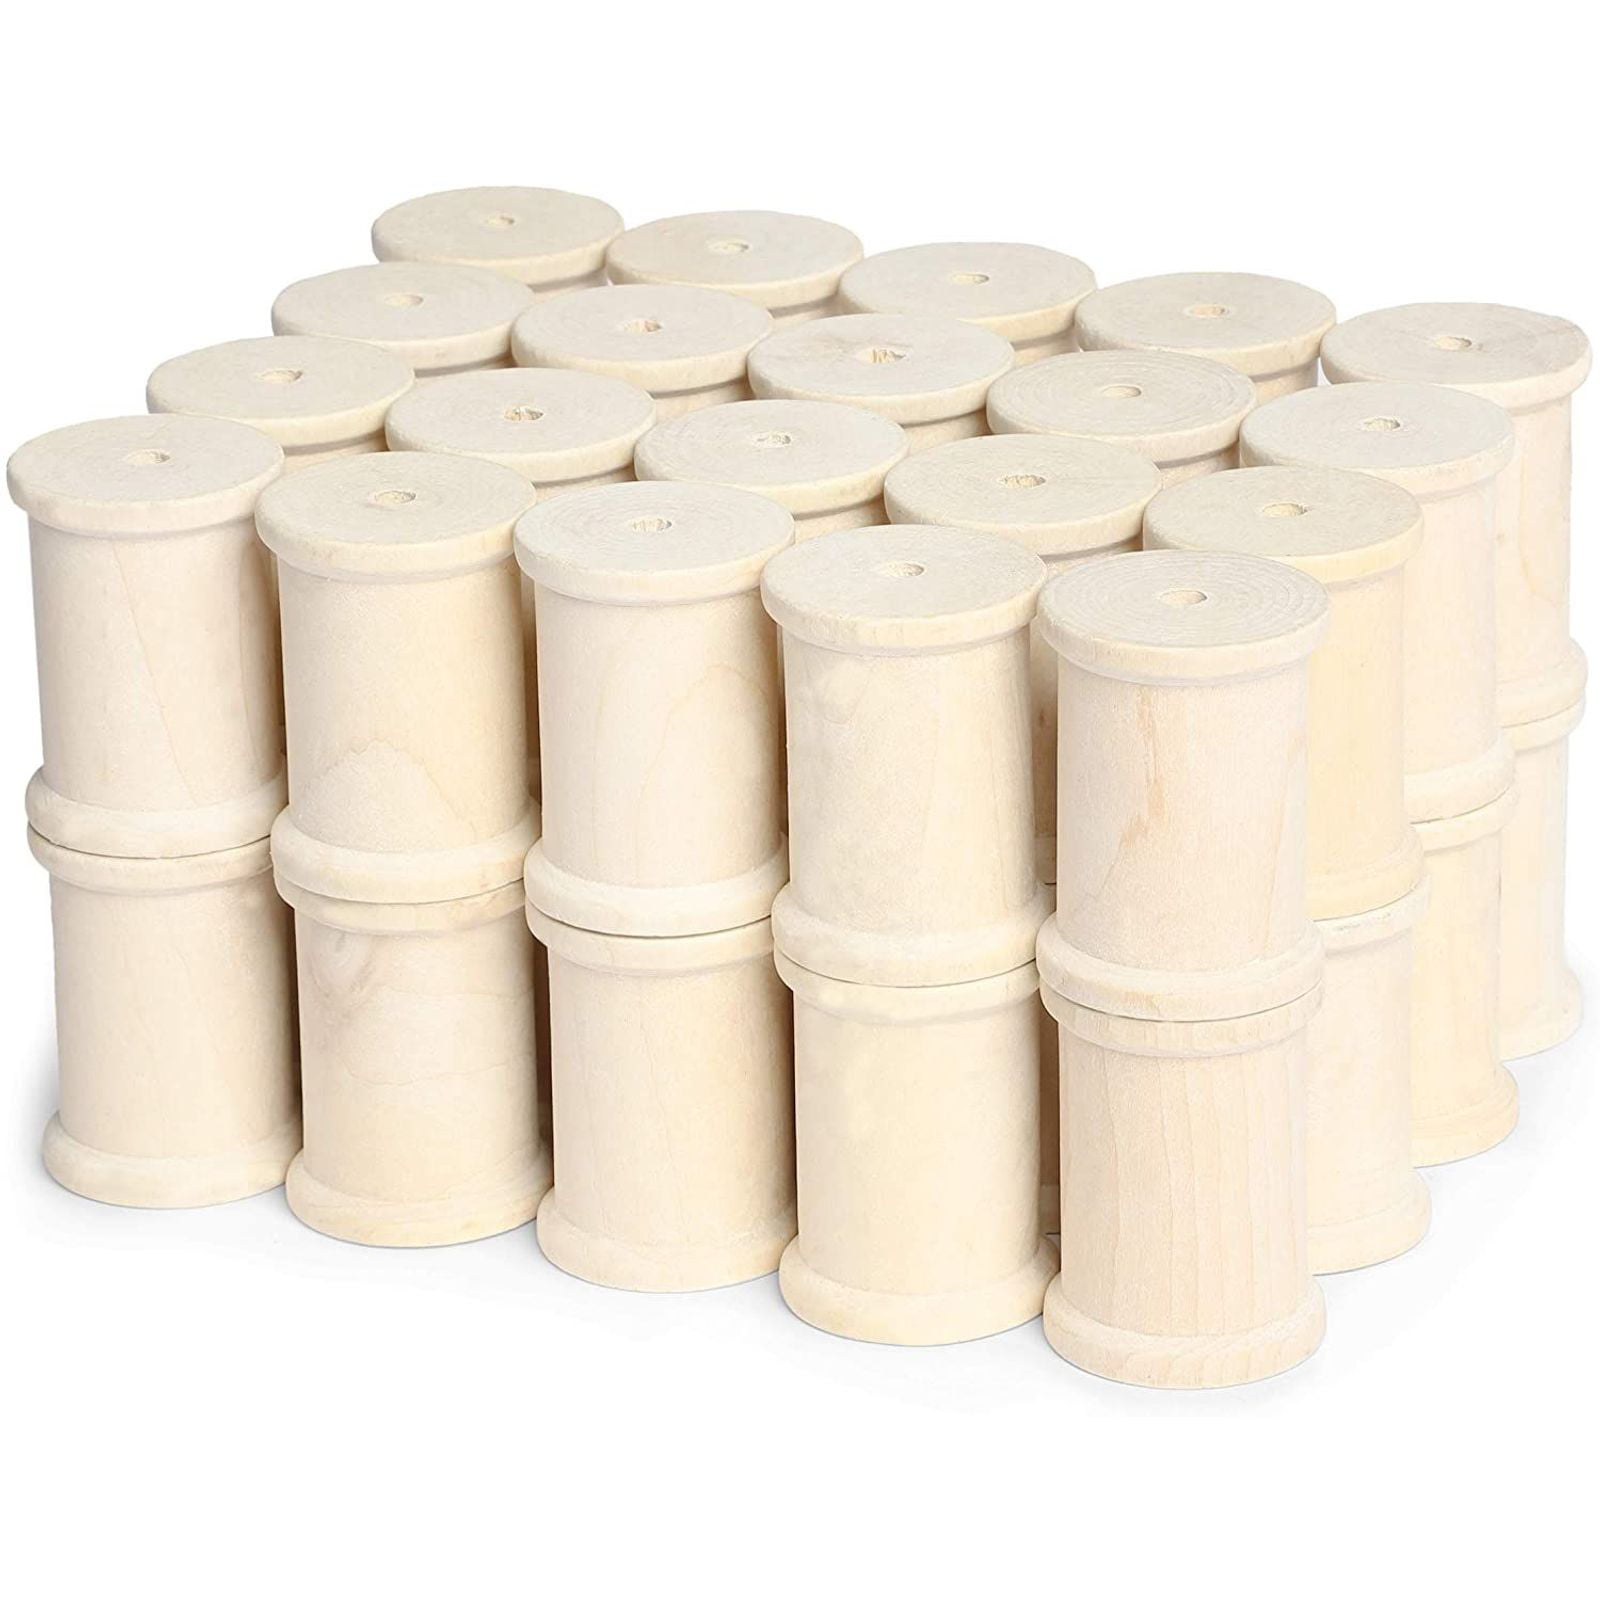 PETTYOLL 40PCS Wooden Spools for Crafts, 1.2 x 2 Inch Unfinished Wood  Spools, Splinter - Free Empty Thread Spools for Crafts and Art